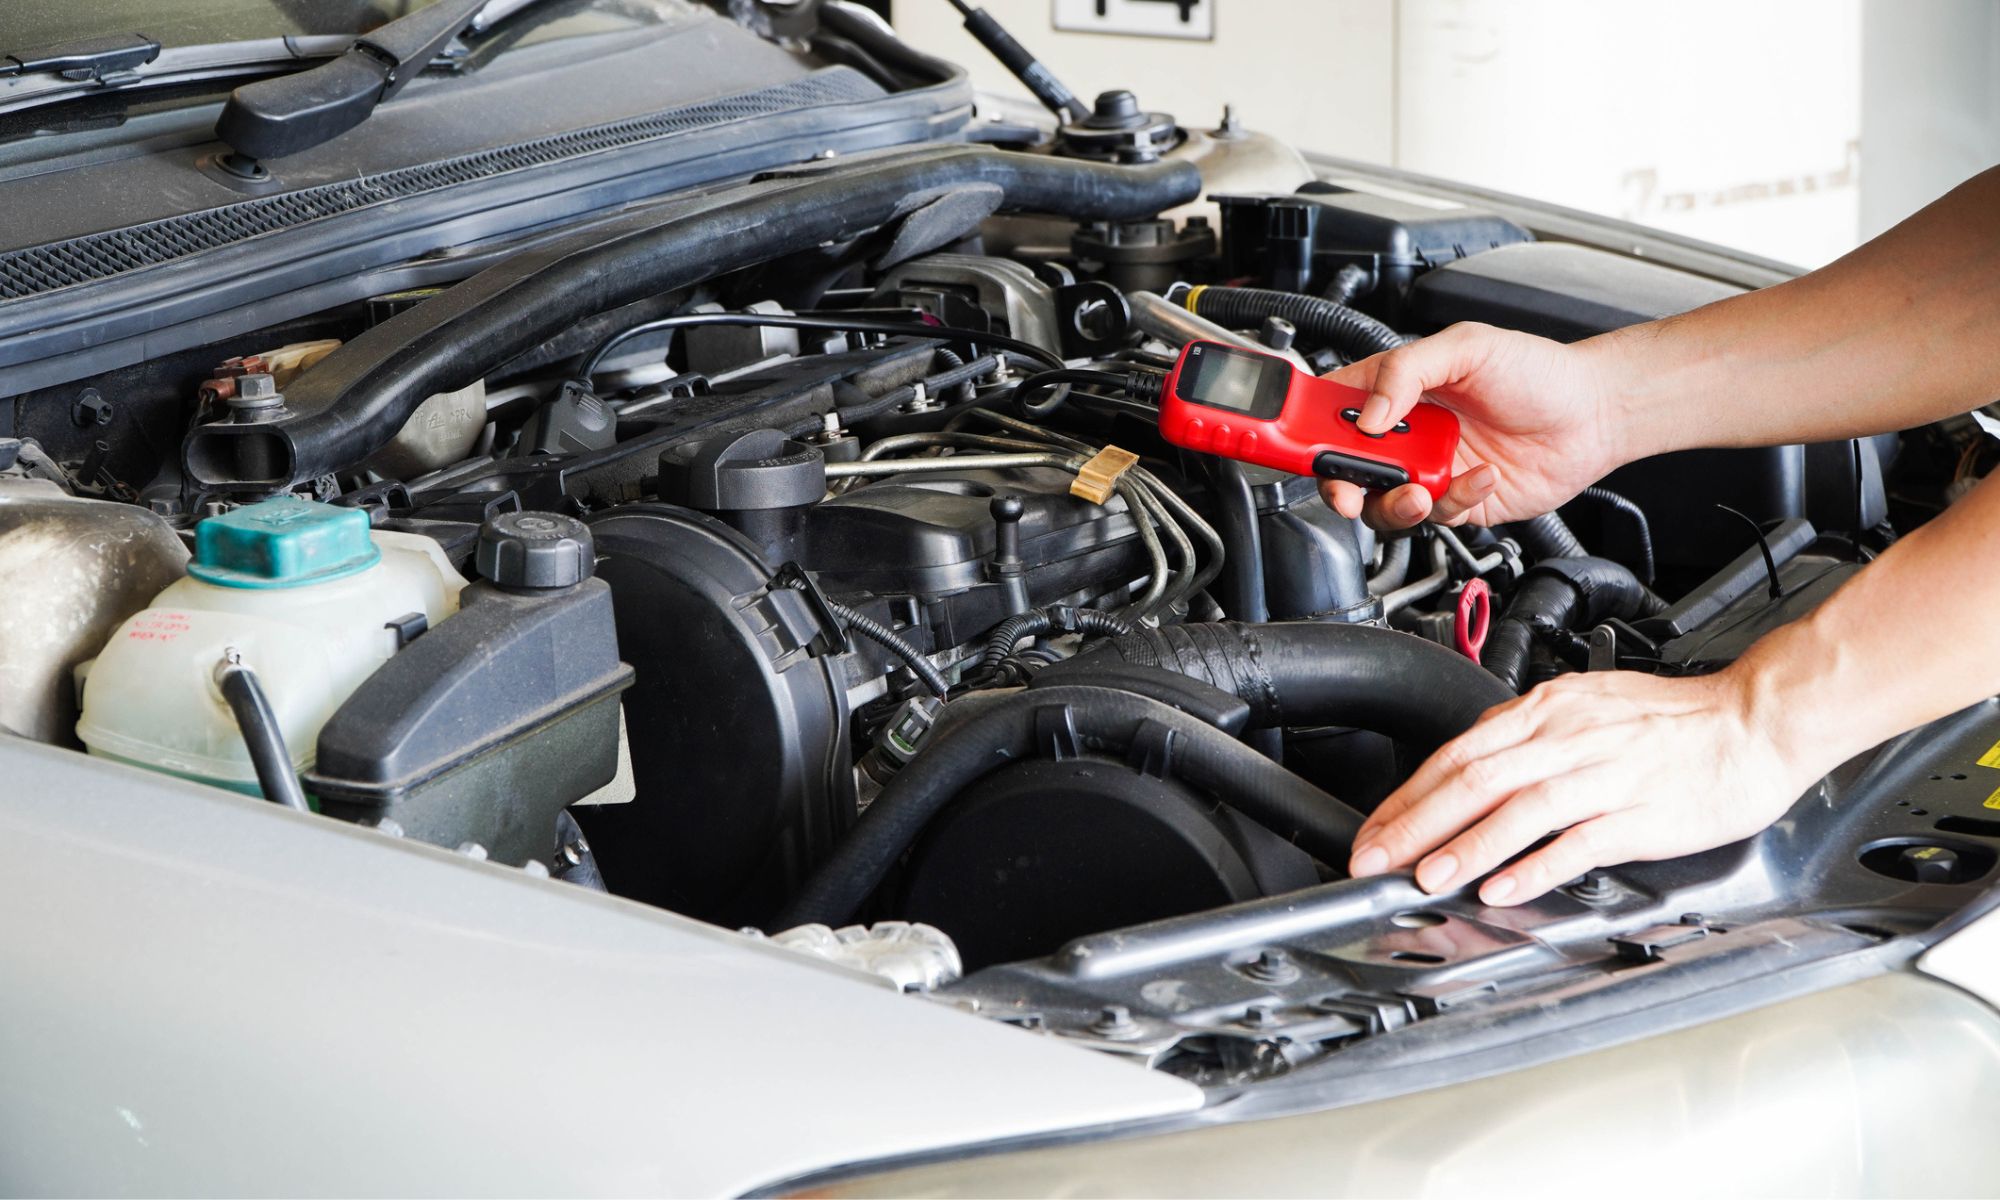 Troubleshoot with ease: Check Engine on Ford Focus 2012